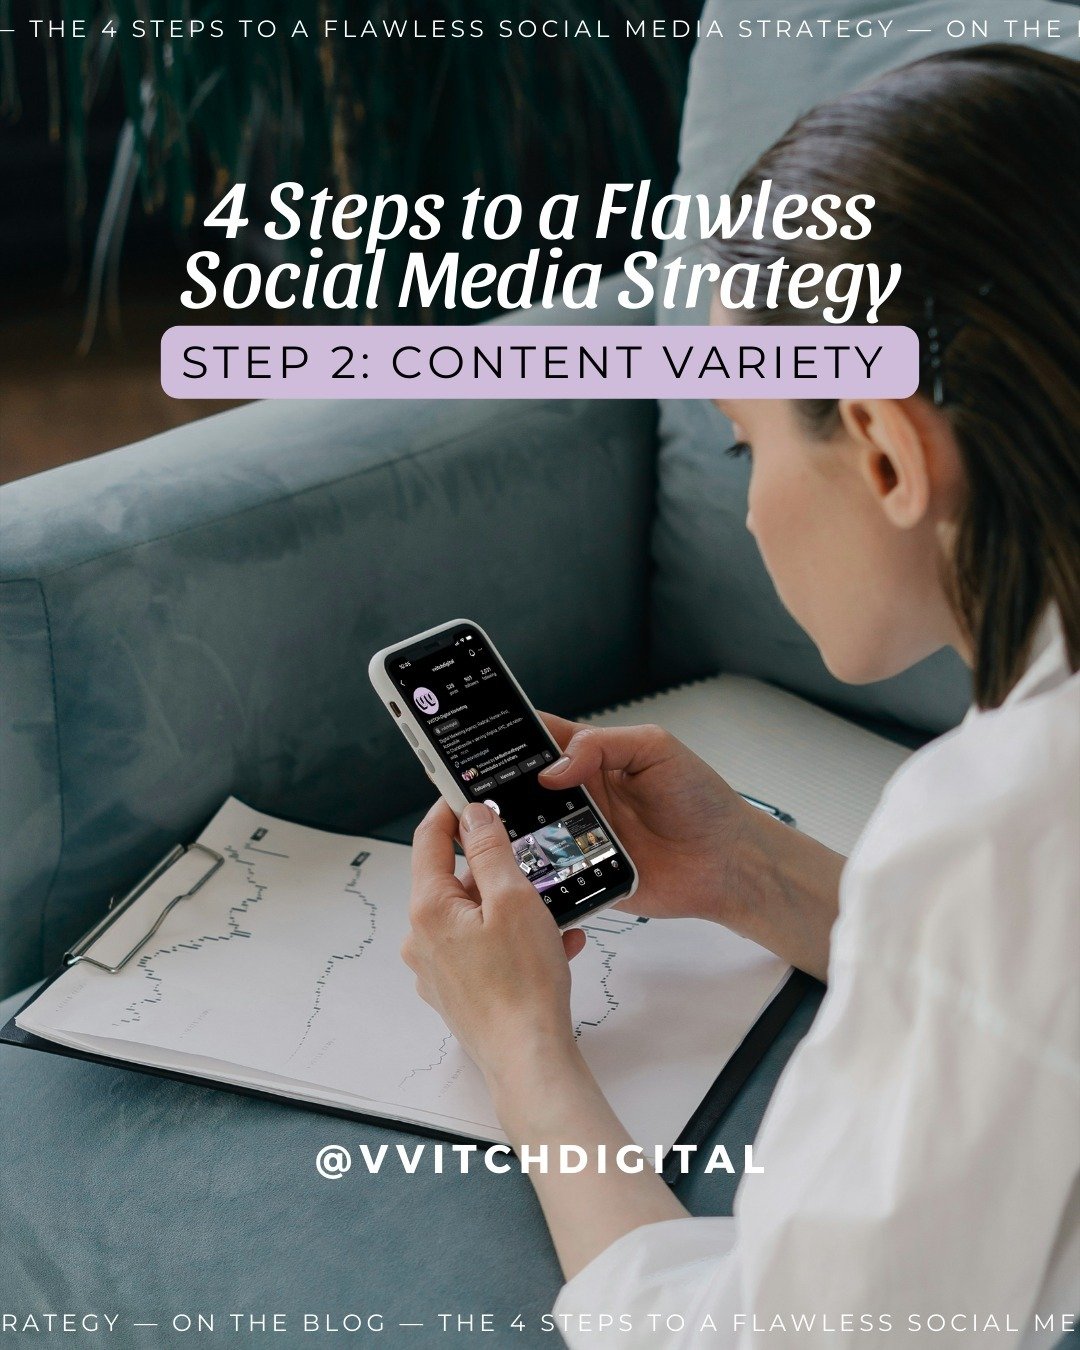 Does your social media strategy have the right content for your audience?

We get it. Running a business is hard work, long hours.

Who truly has enough time (and arms) to spend hours on social media? 🤯

What if we told you that our recent blog post